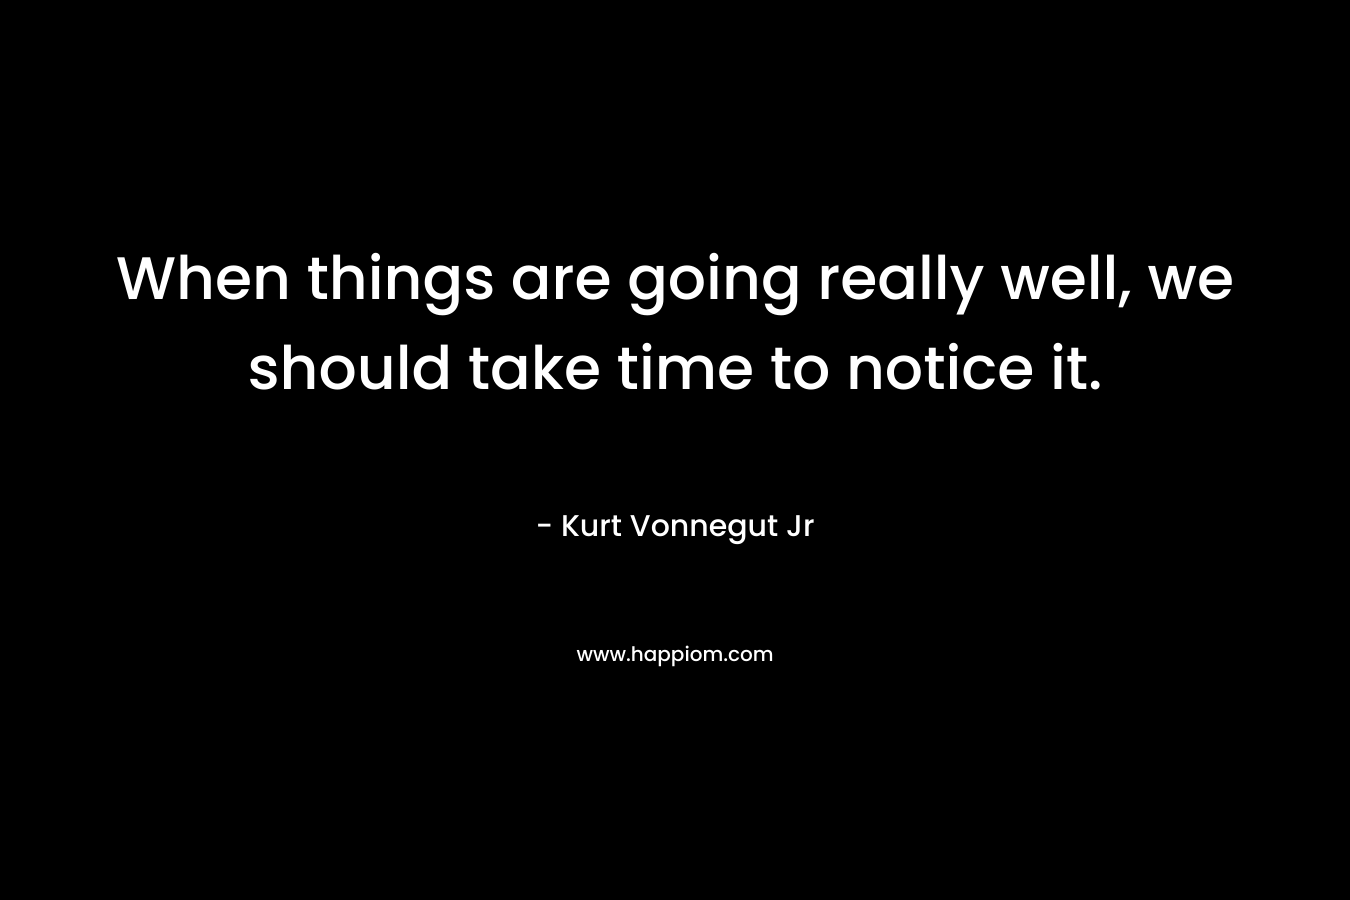 When things are going really well, we should take time to notice it. – Kurt Vonnegut Jr